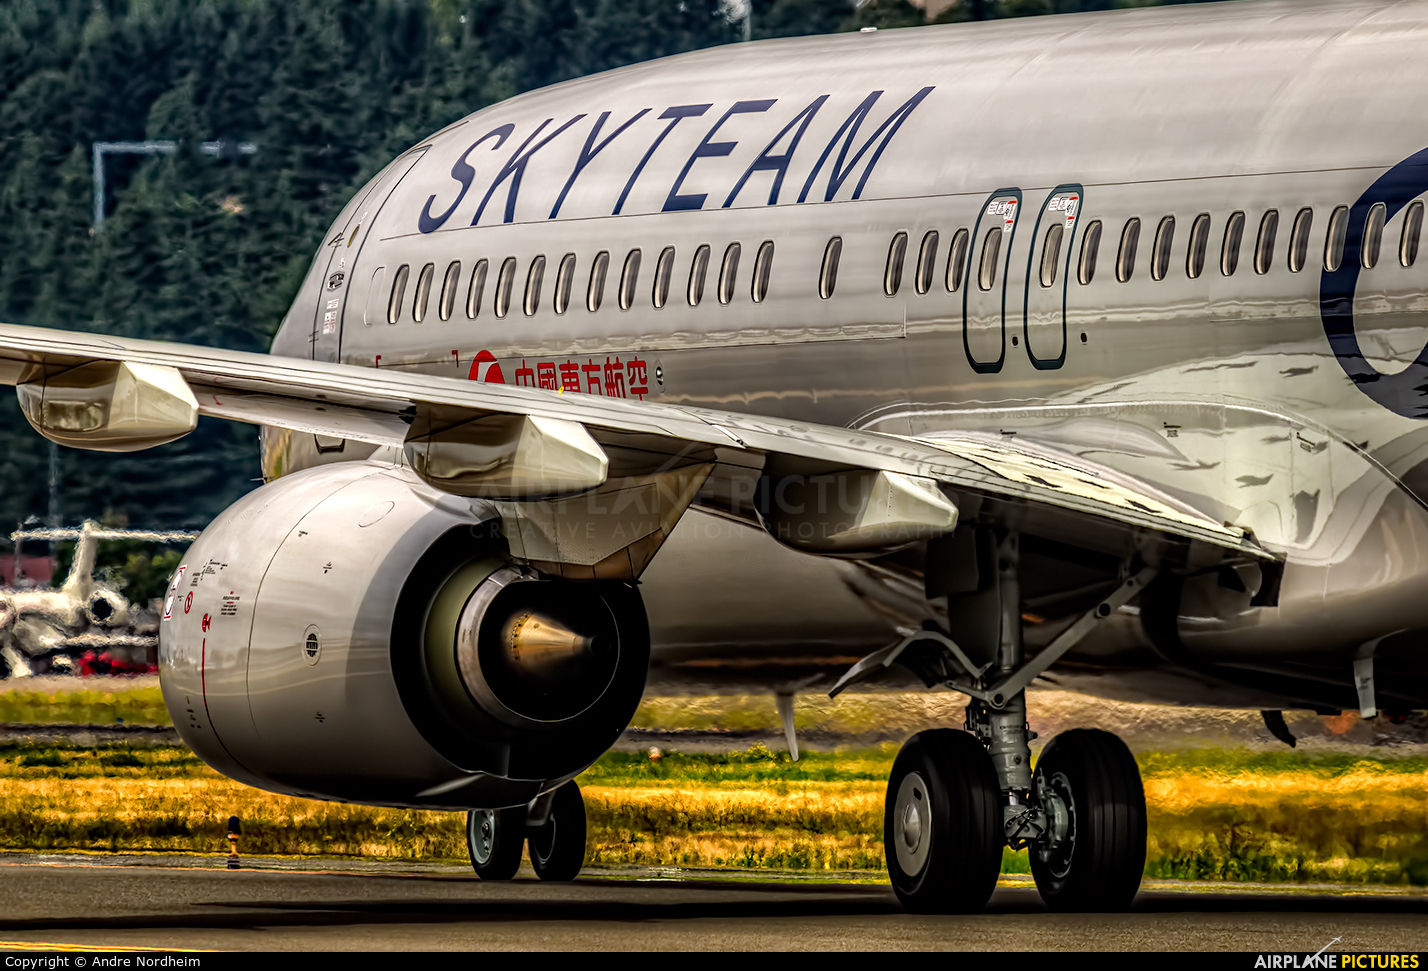 China Eastern Airlines B-1981 aircraft at Seattle - Boeing Field / King County Intl